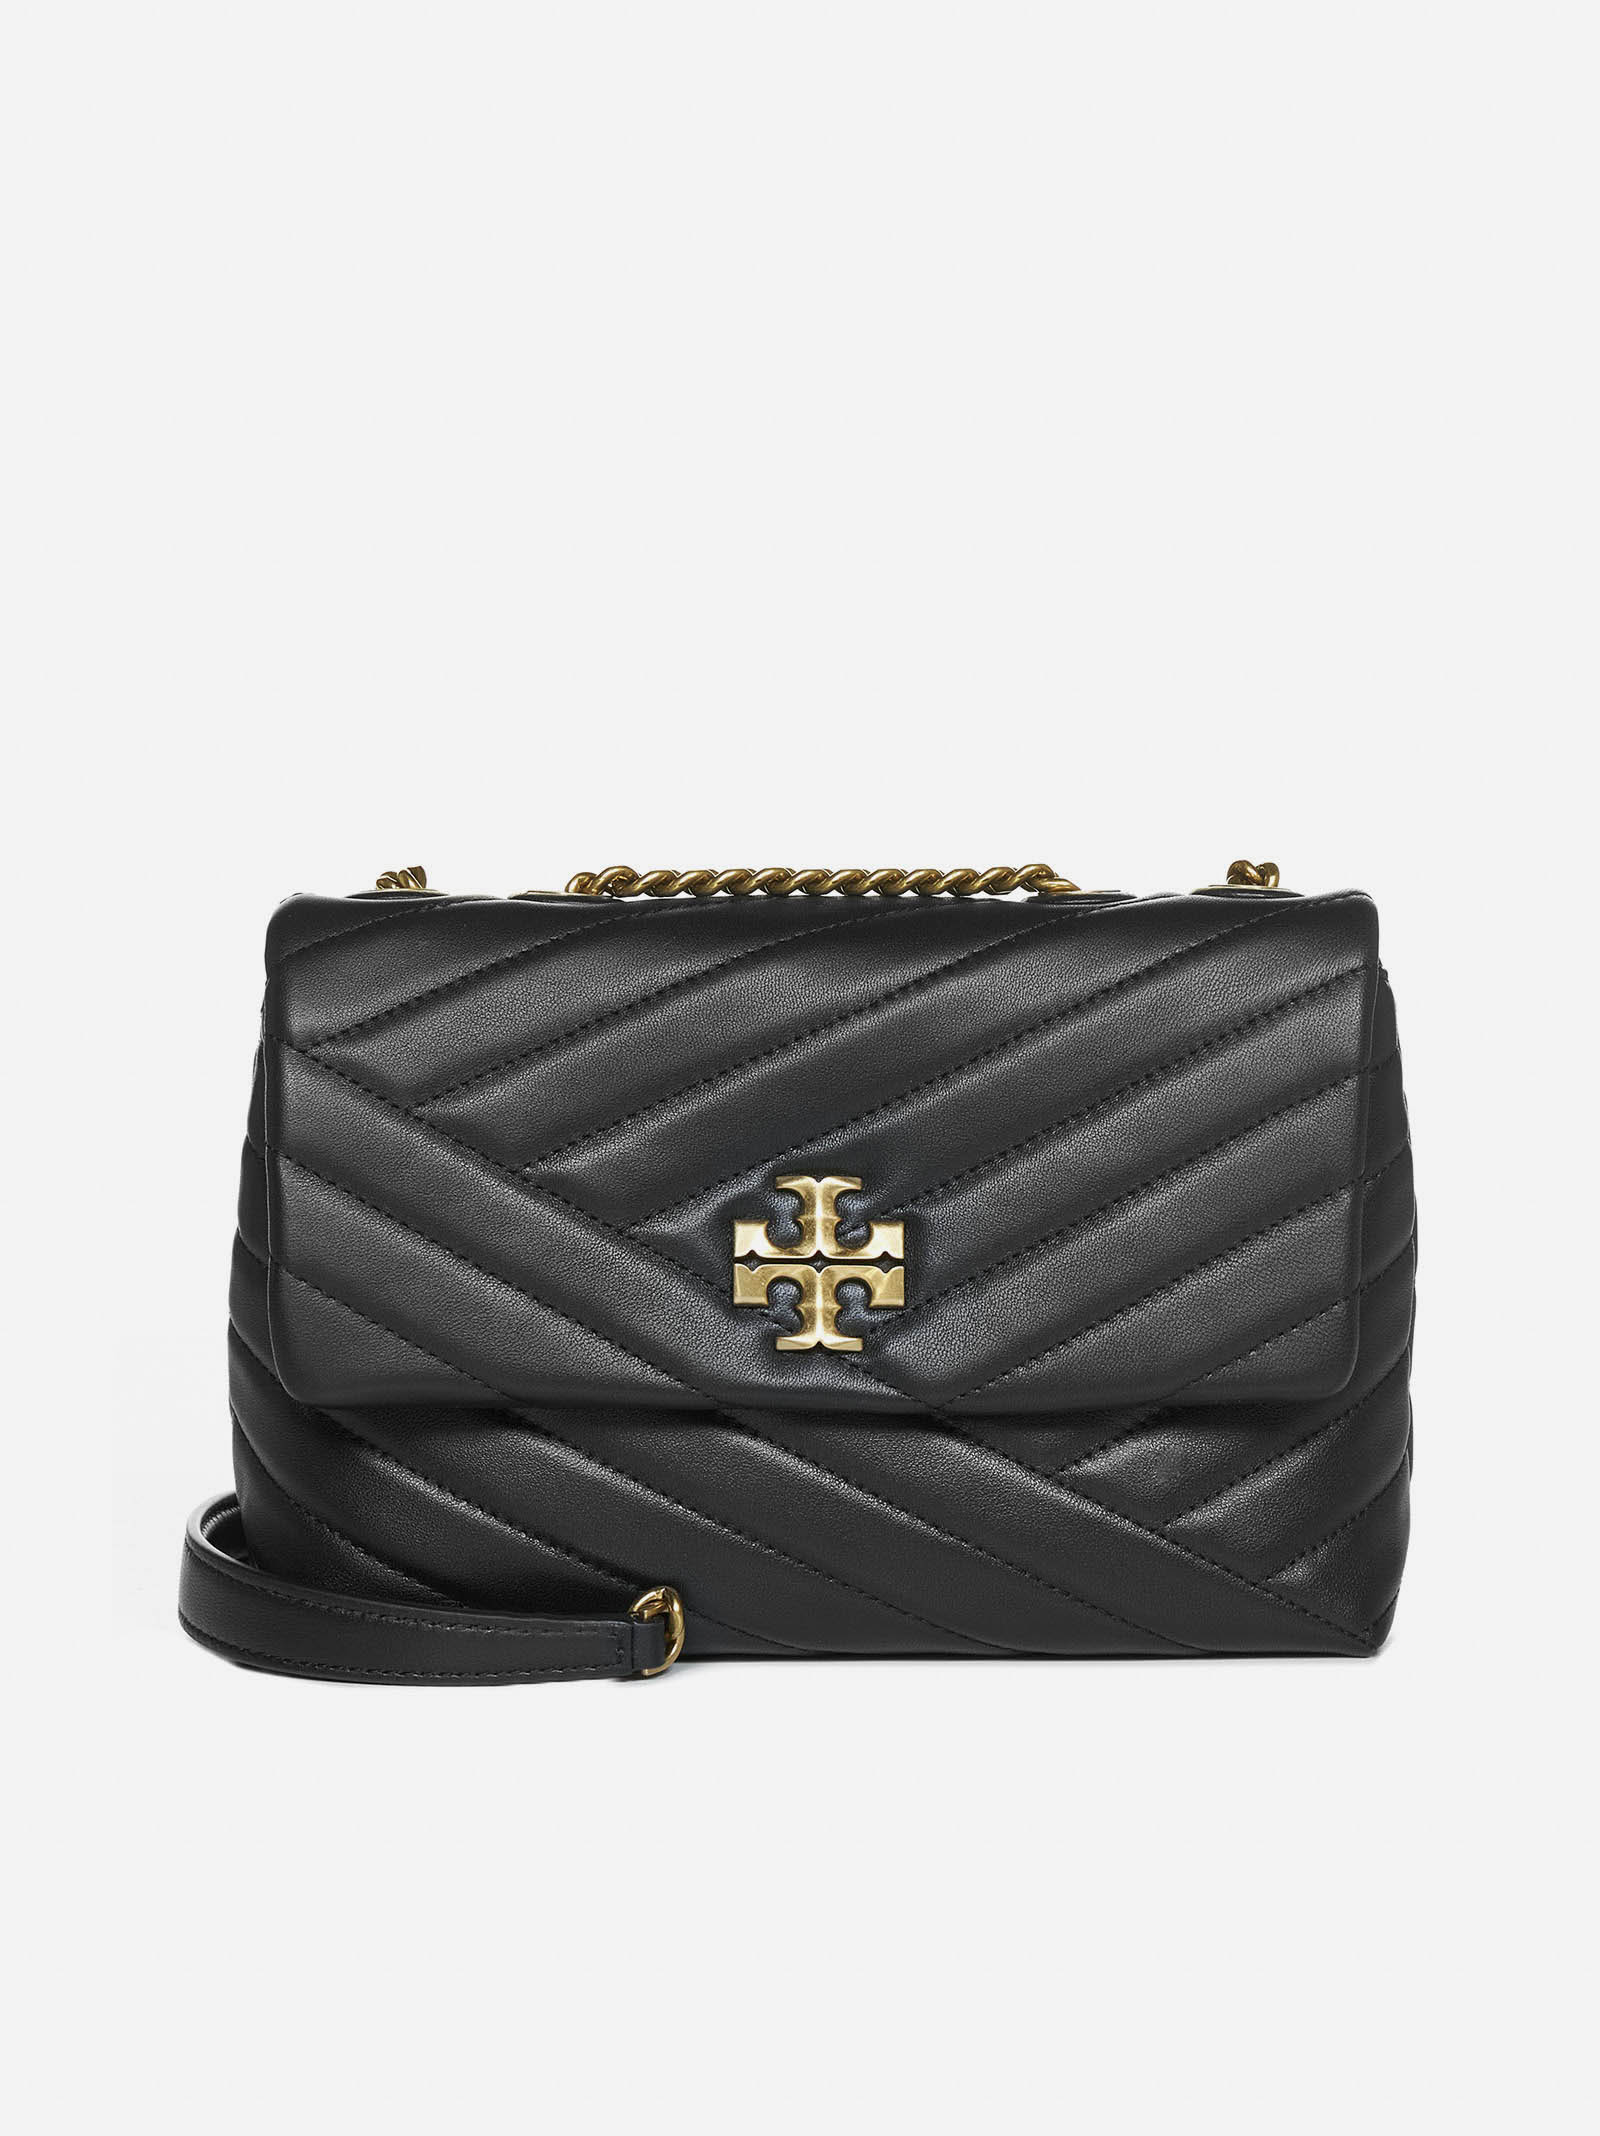 Tory Burch KIRA CHEVRON SMALL CONVERTIBLE LEATHER SHOULDER BAG size One  Size - Realry: A global fashion sites aggregator